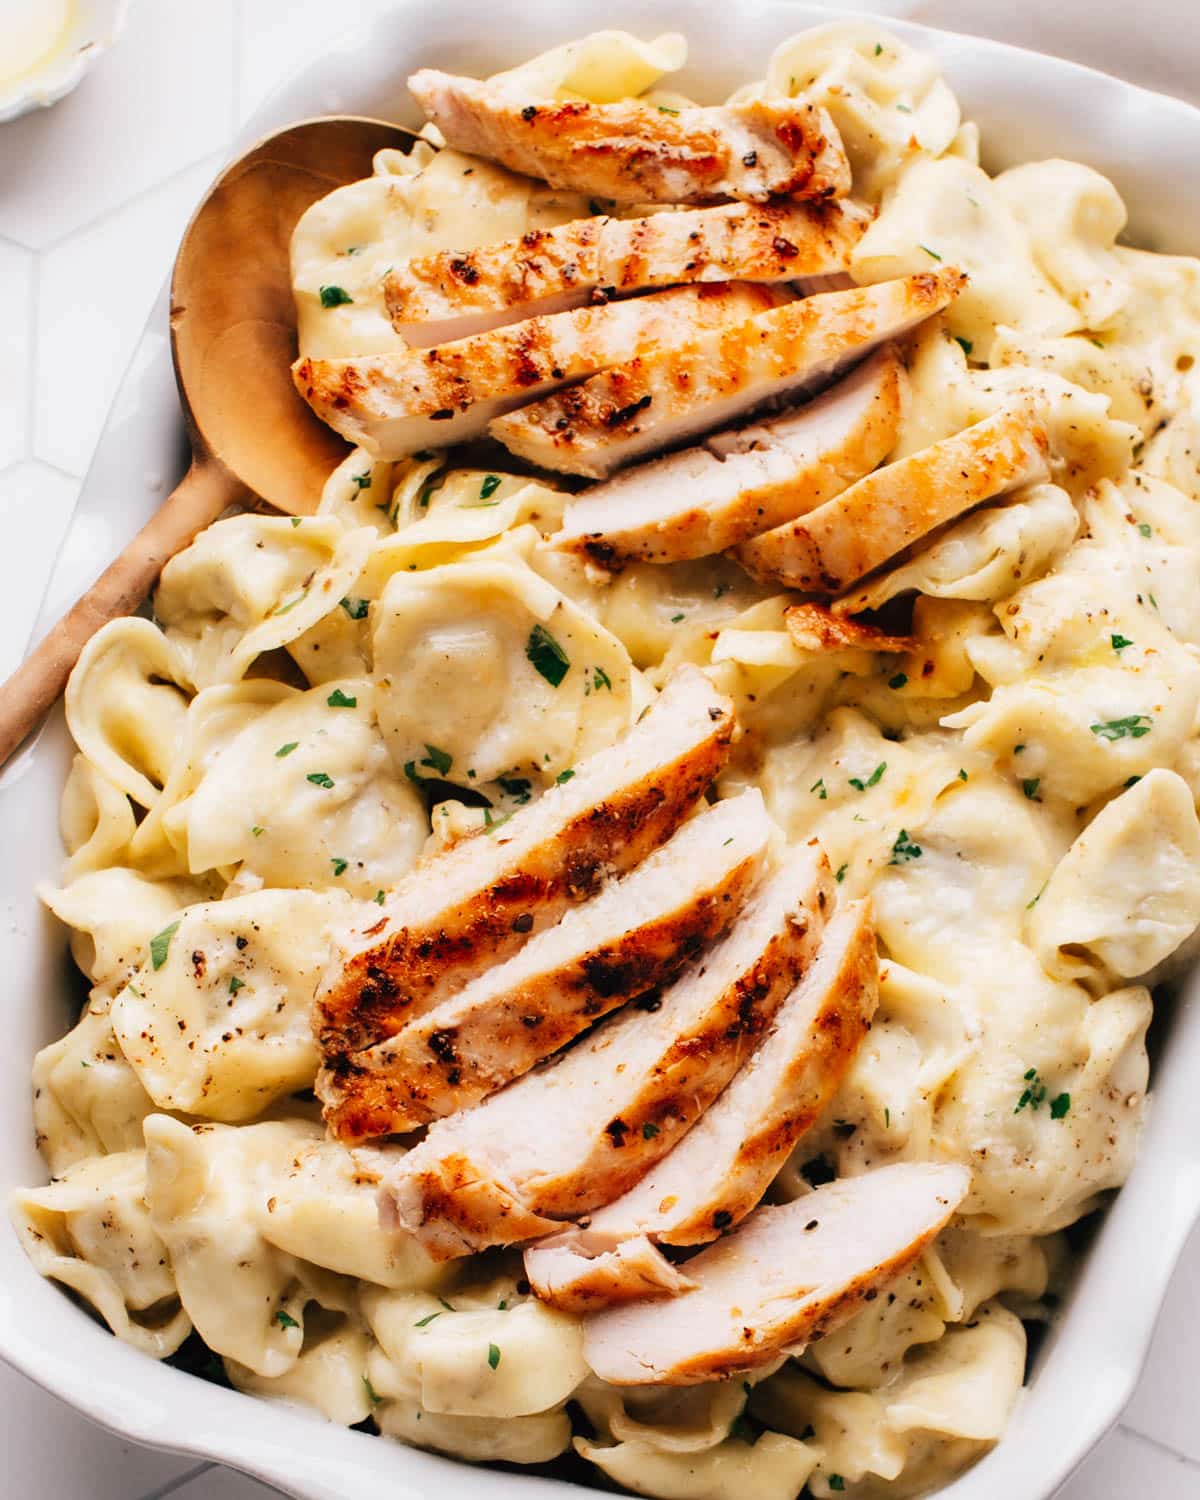 Asiago tortellini Alfredo with grilled chicken served in a white baking dish on a wooden table. The dish is garnished with minced chives and parsley.